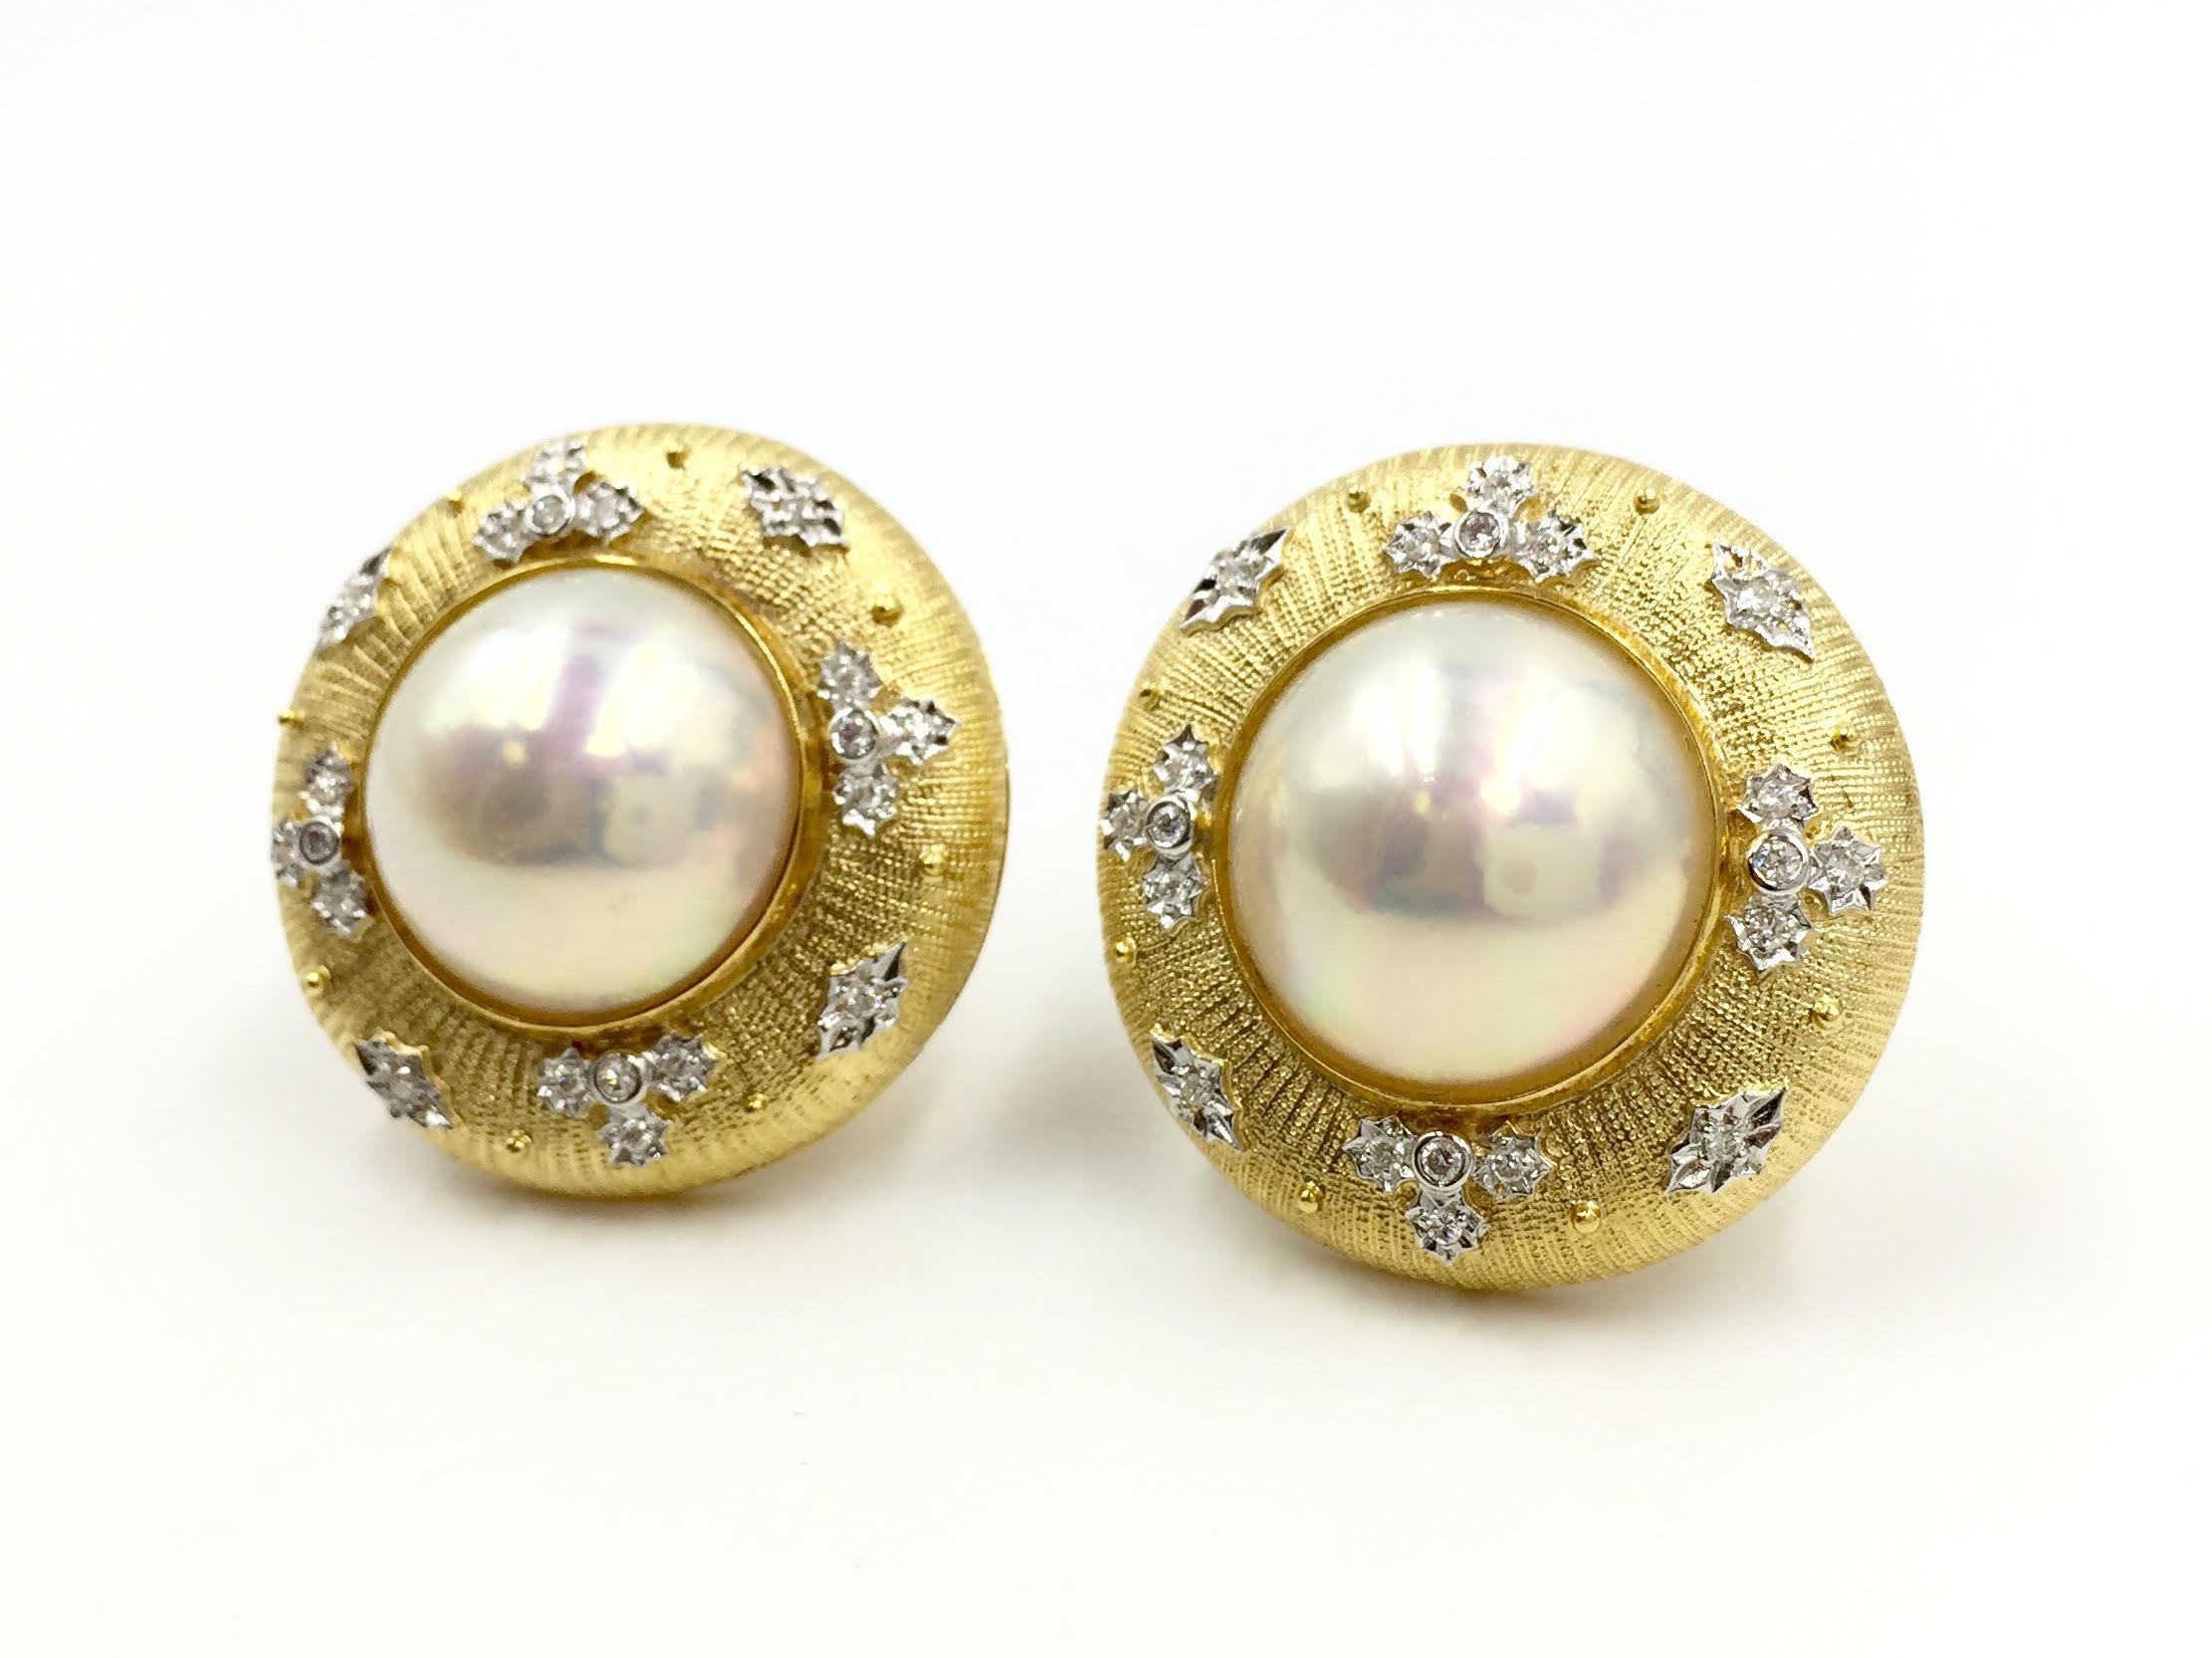 With exquisite texture and design similar to that of renowned Italian designer Buccellati, these larger 18k gold button style earrings make a statement while maintaining elegance. The 15mm mabé pearls have beautiful luster and iridescence. 0.35